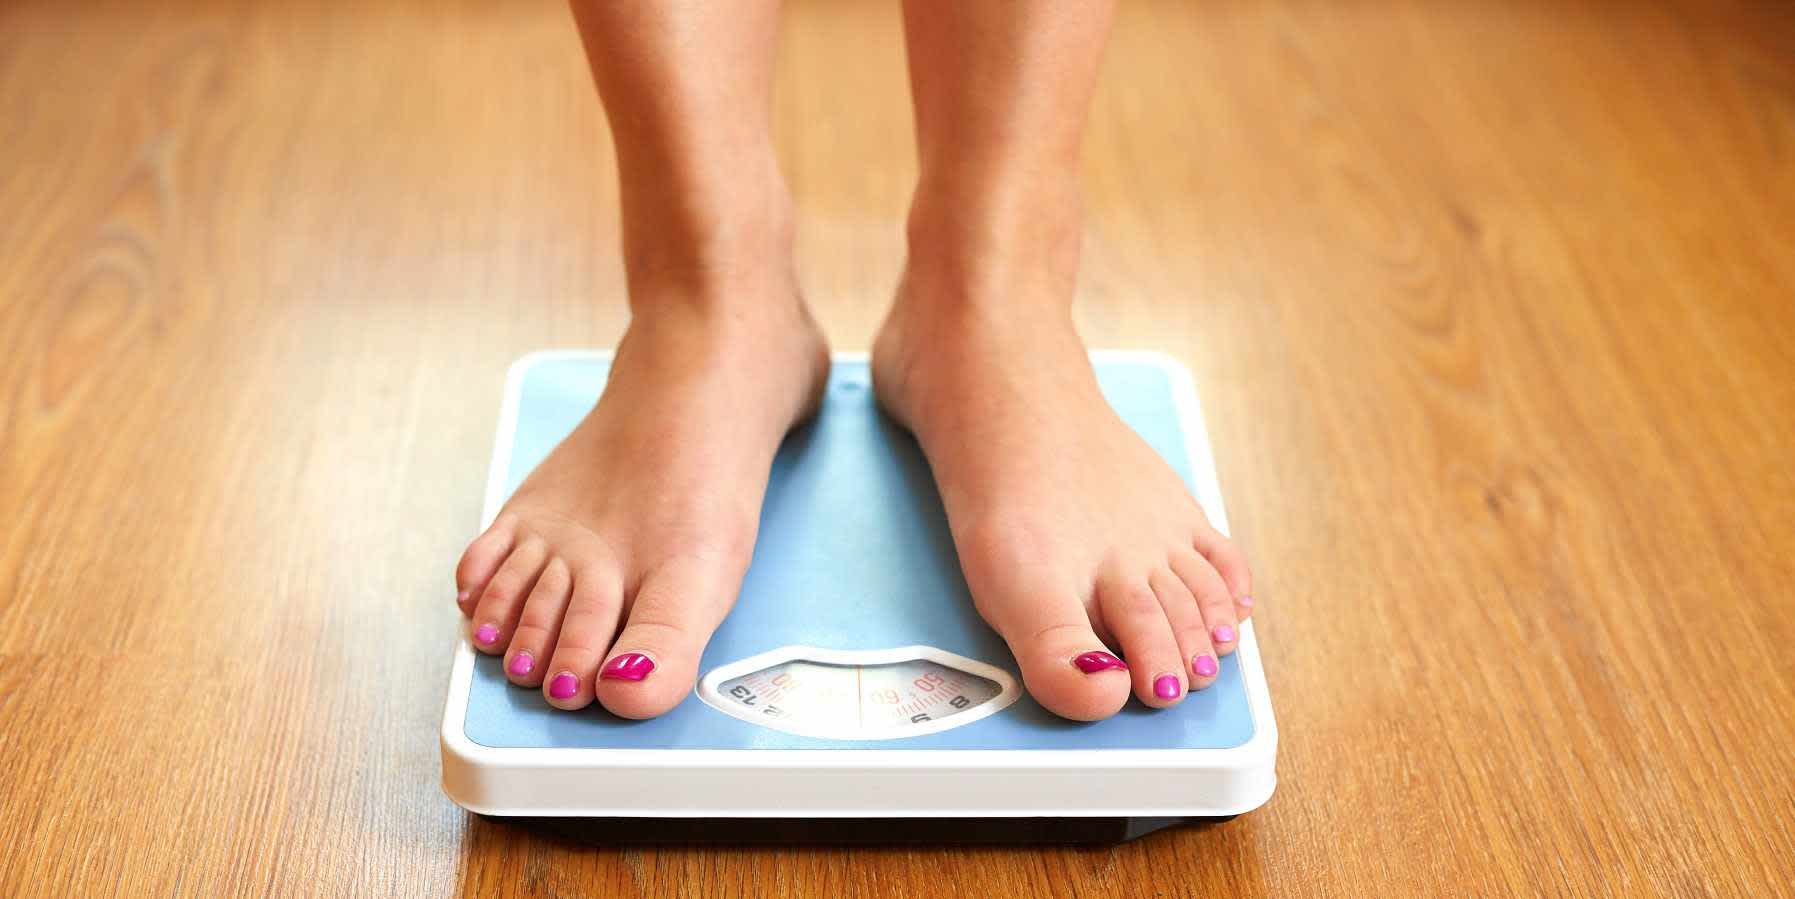 Person standing on bathroom scale while wondering about kidney disease and weight gain